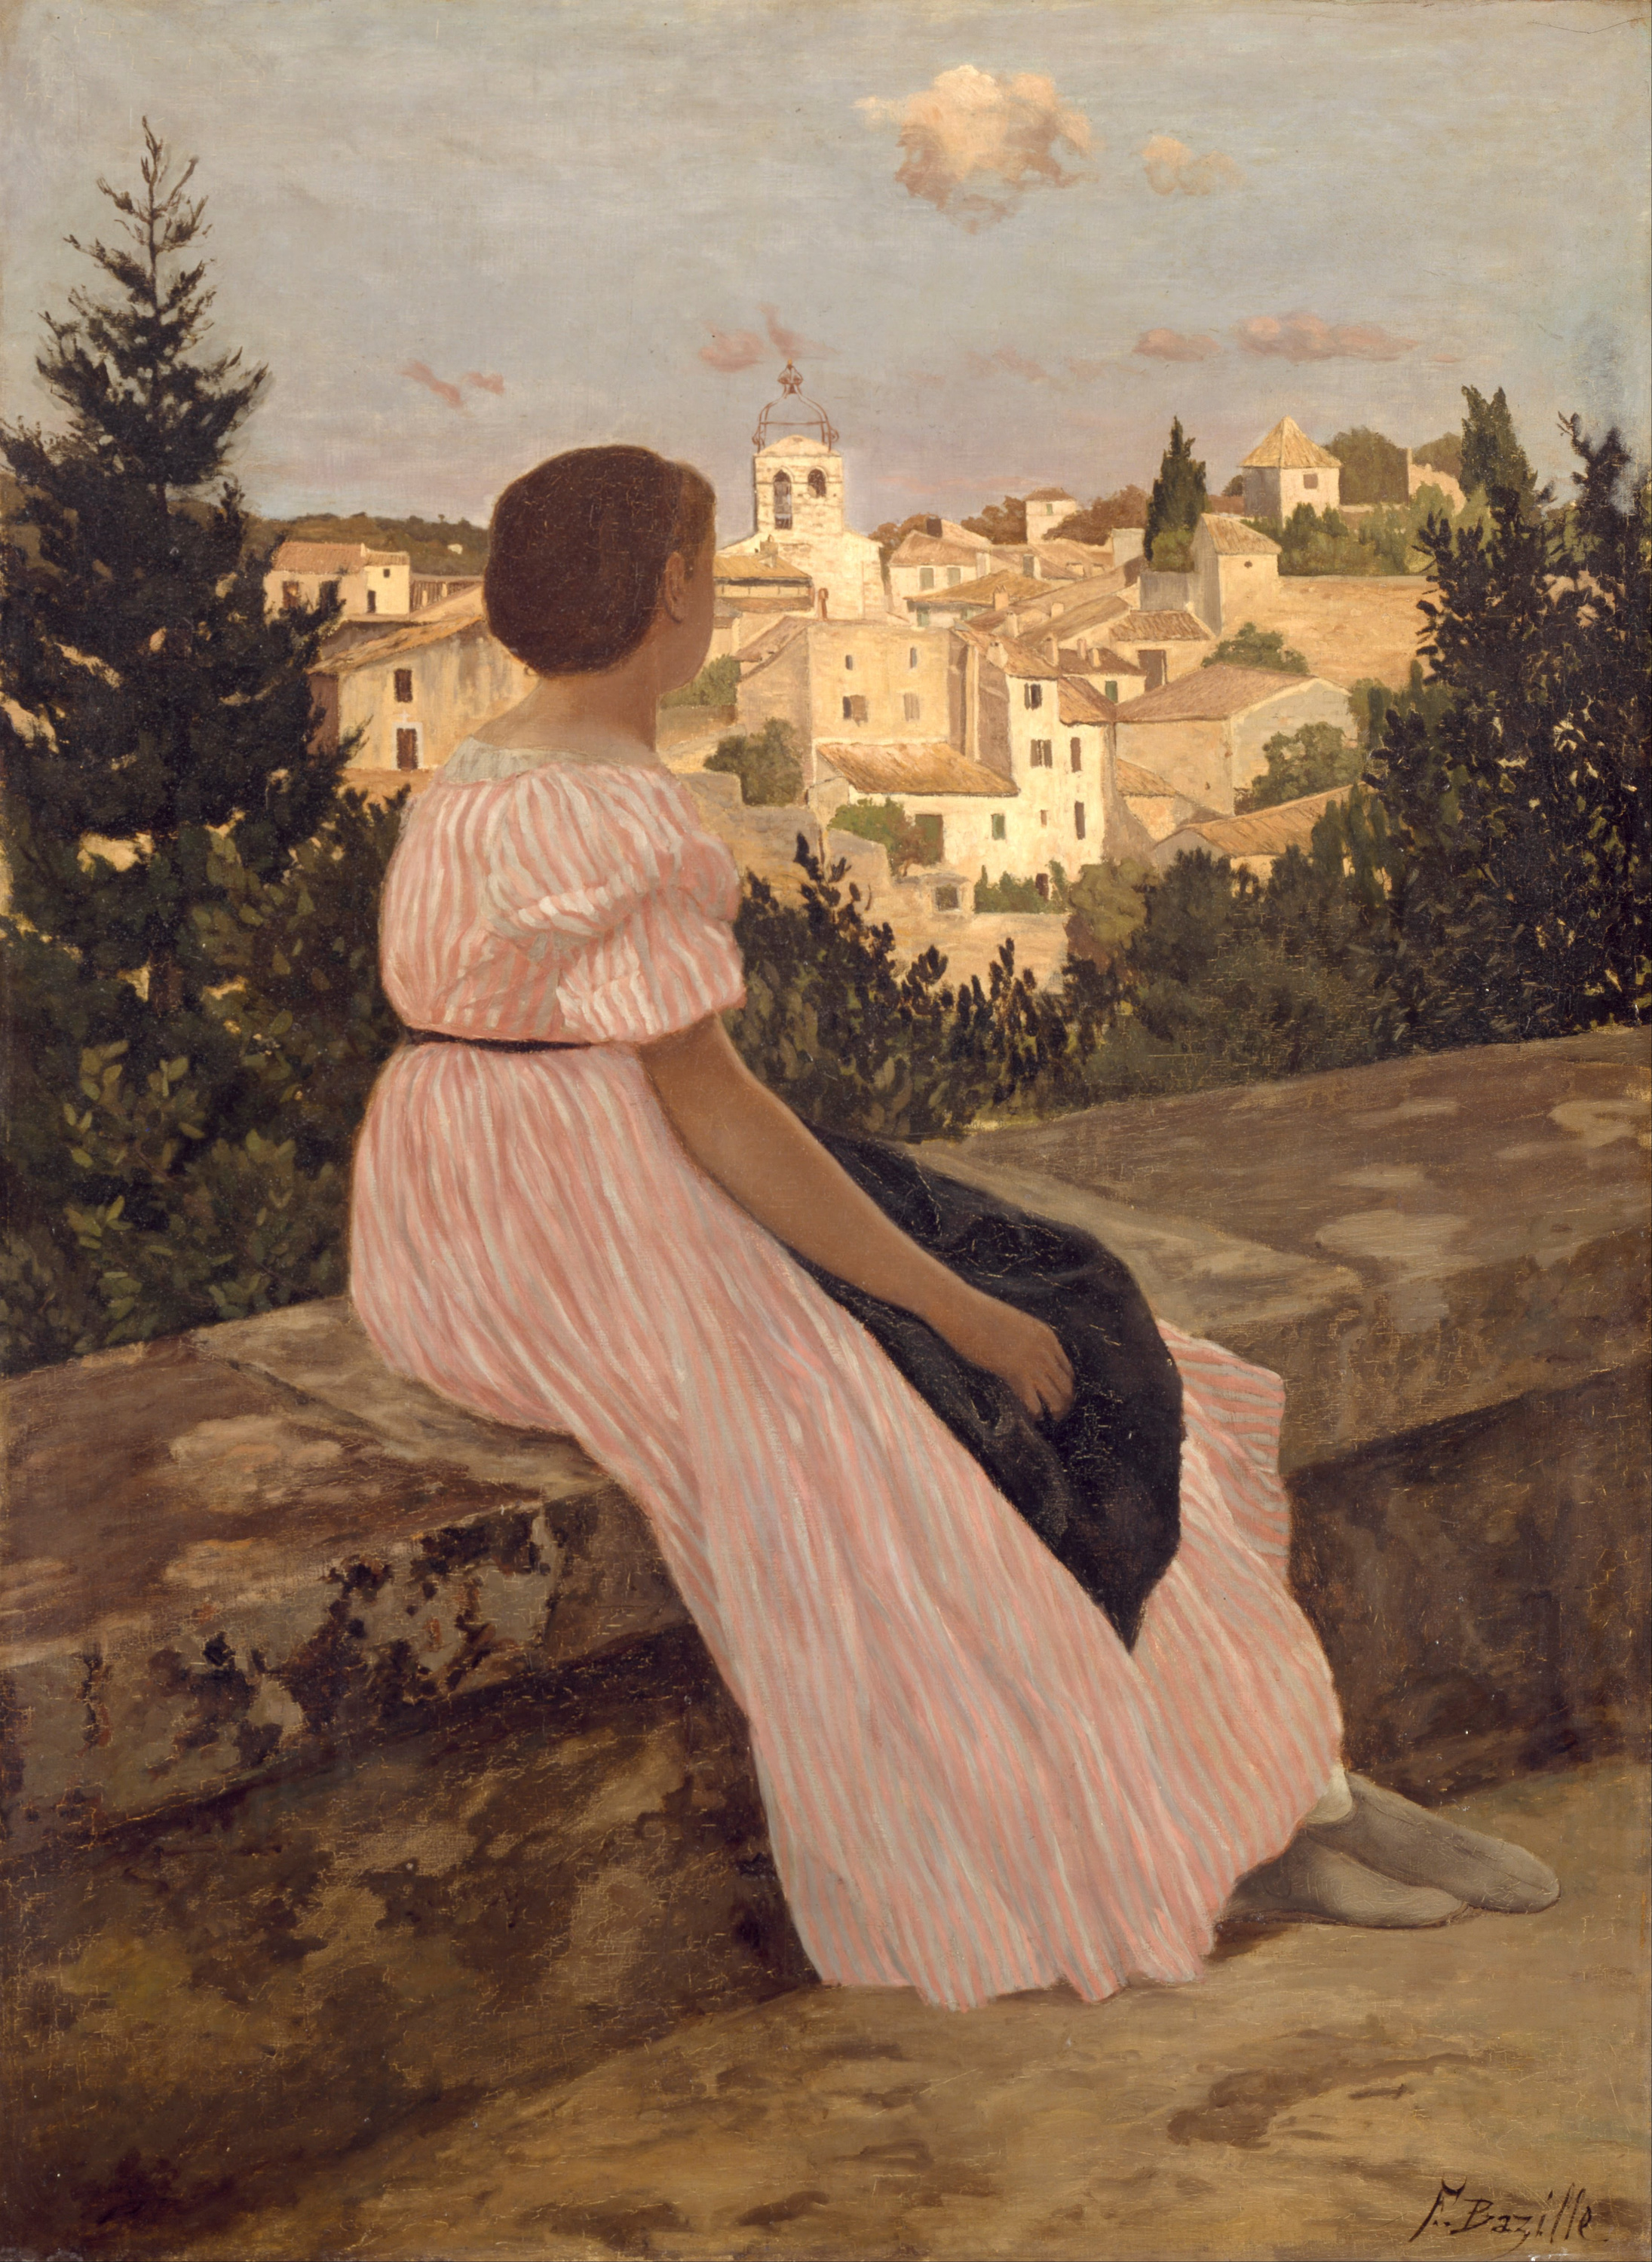 The Pink Dress by Frédéric Bazille - 1864 - 147 x 110 cm Musée d'Orsay